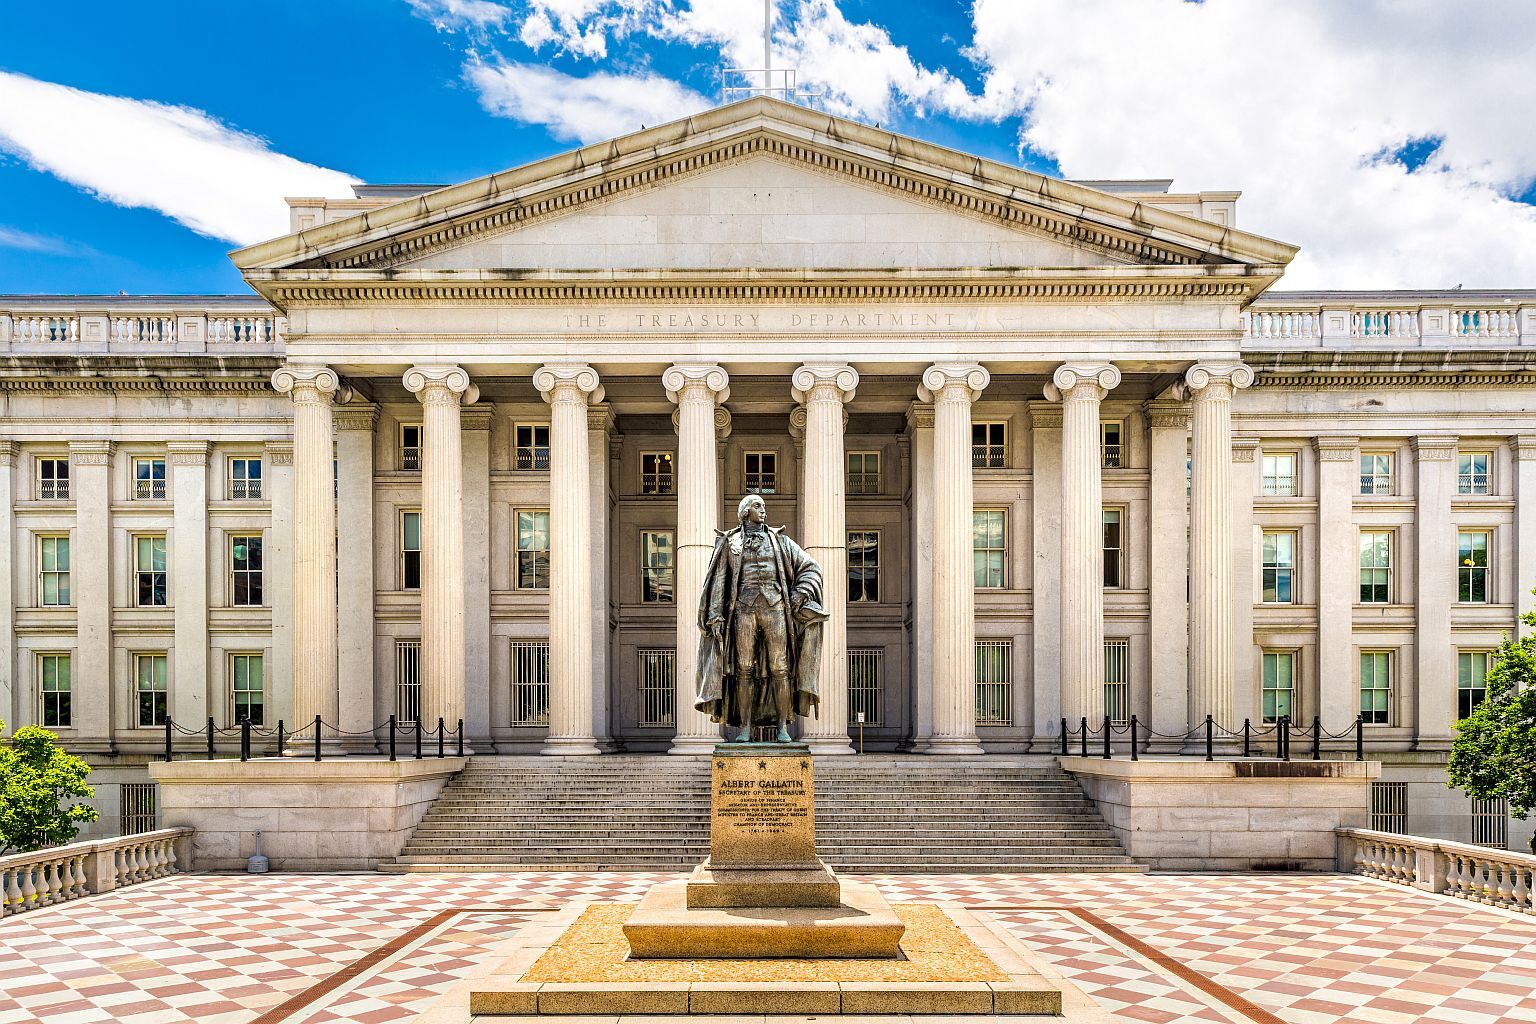 US Treasury Building and CT Corporation's review of corporate transparency act